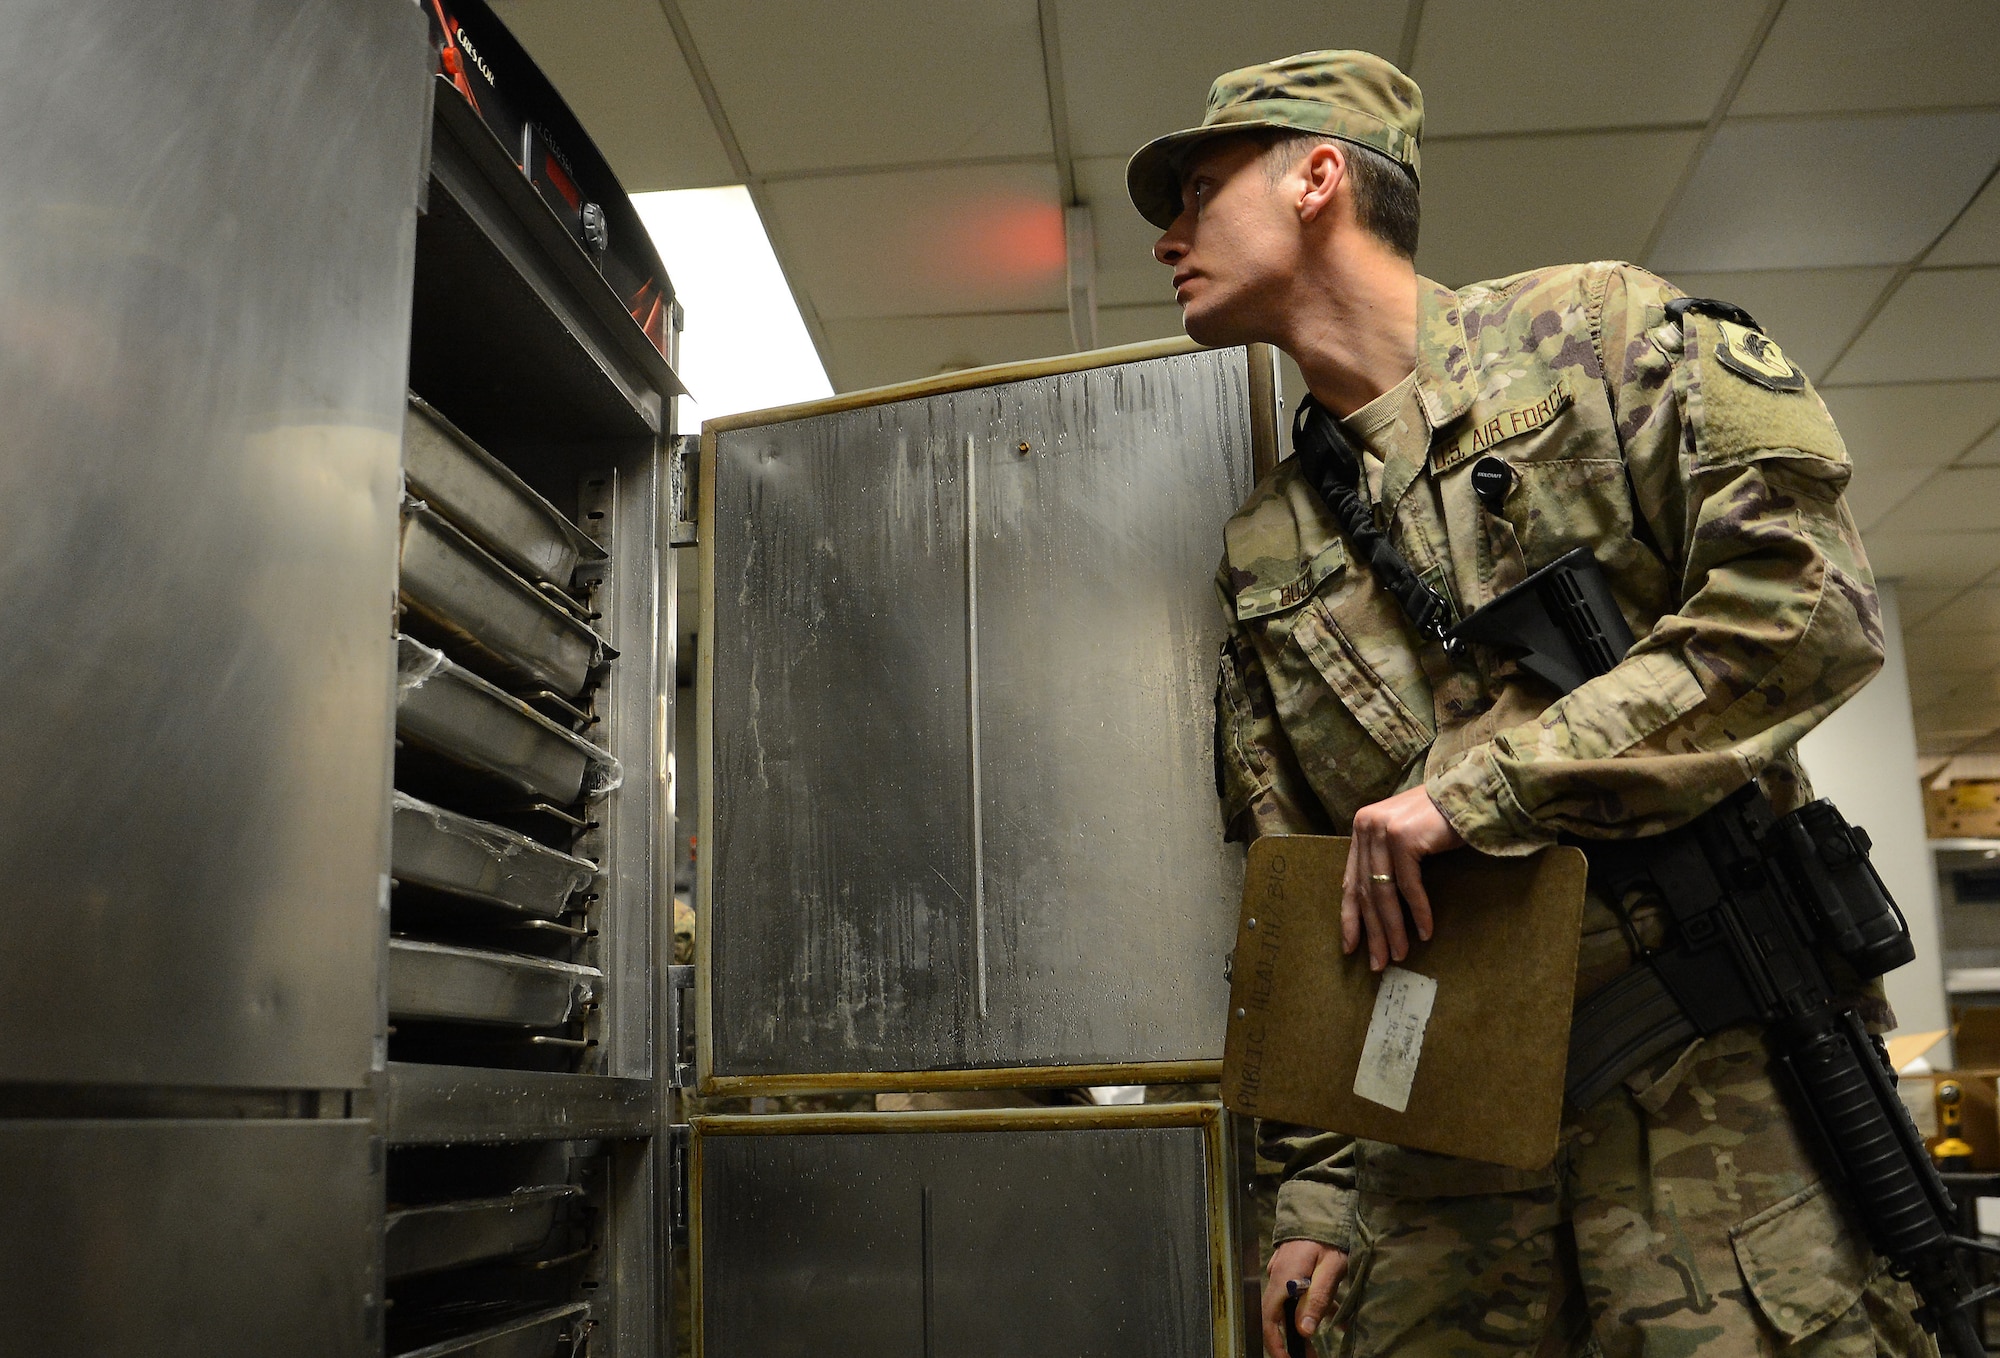 Staff Sgt. Nikola Bozic, 455th Expeditionary Medical Group public health technician, inspects a food warmer during his routine food inspection of the Grady dining facility Feb. 15, 2018 at Bagram Airfield, Afghanistan.